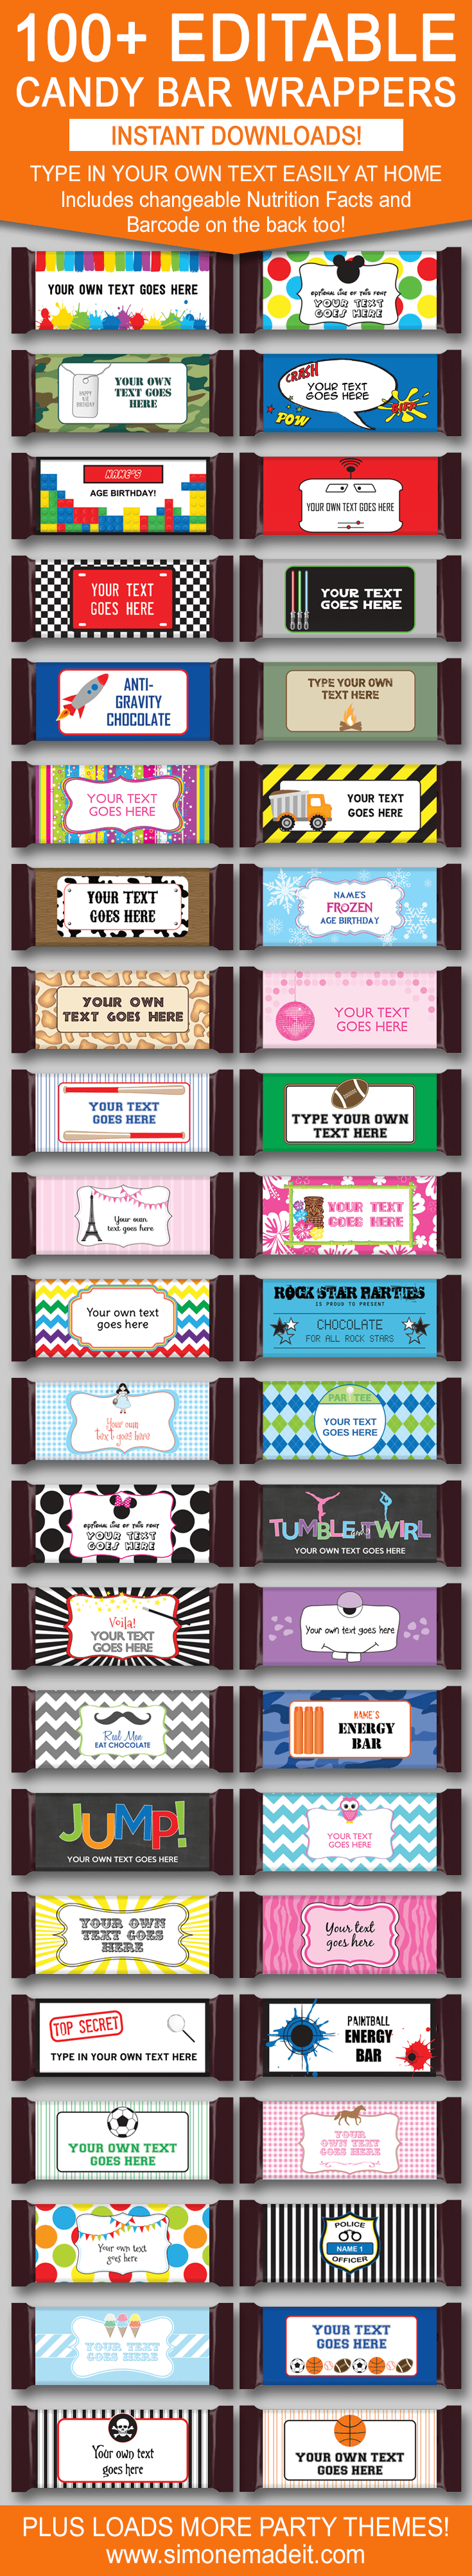 Chocolate Bar Wrappers Template from www.simonemadeit.com